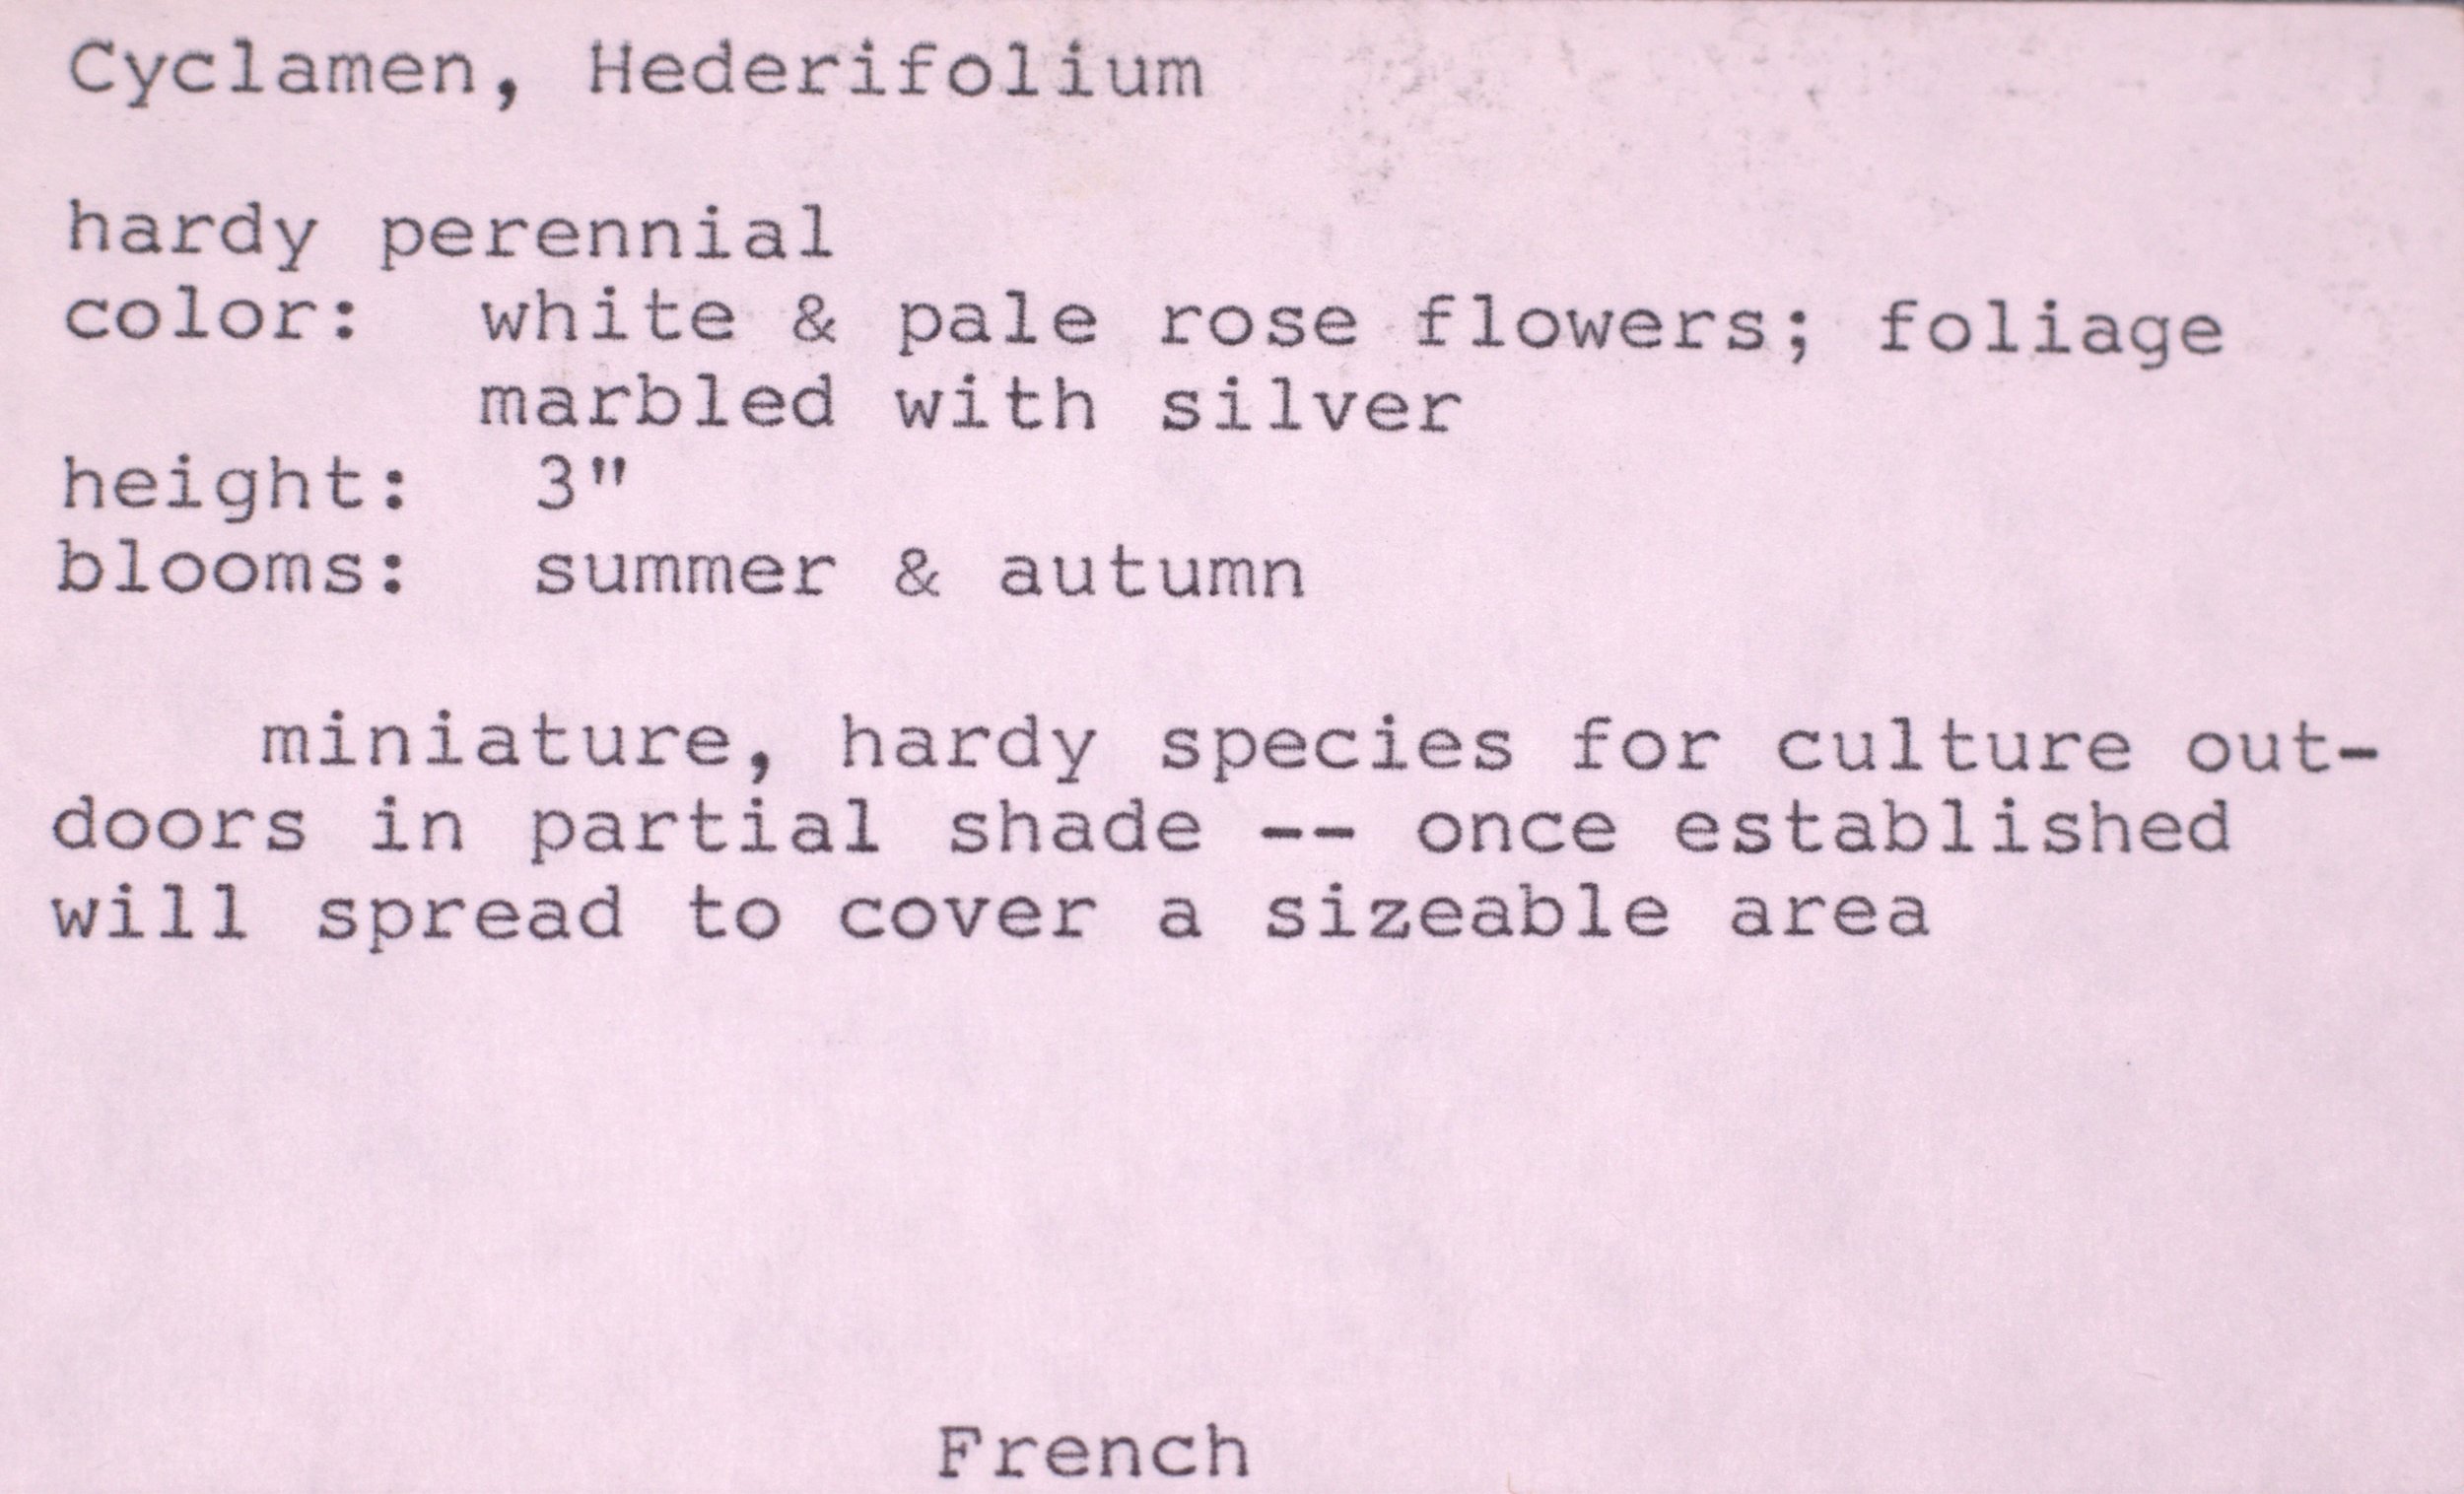  Index card used by Bunny and Garden Staff to record plantings.  